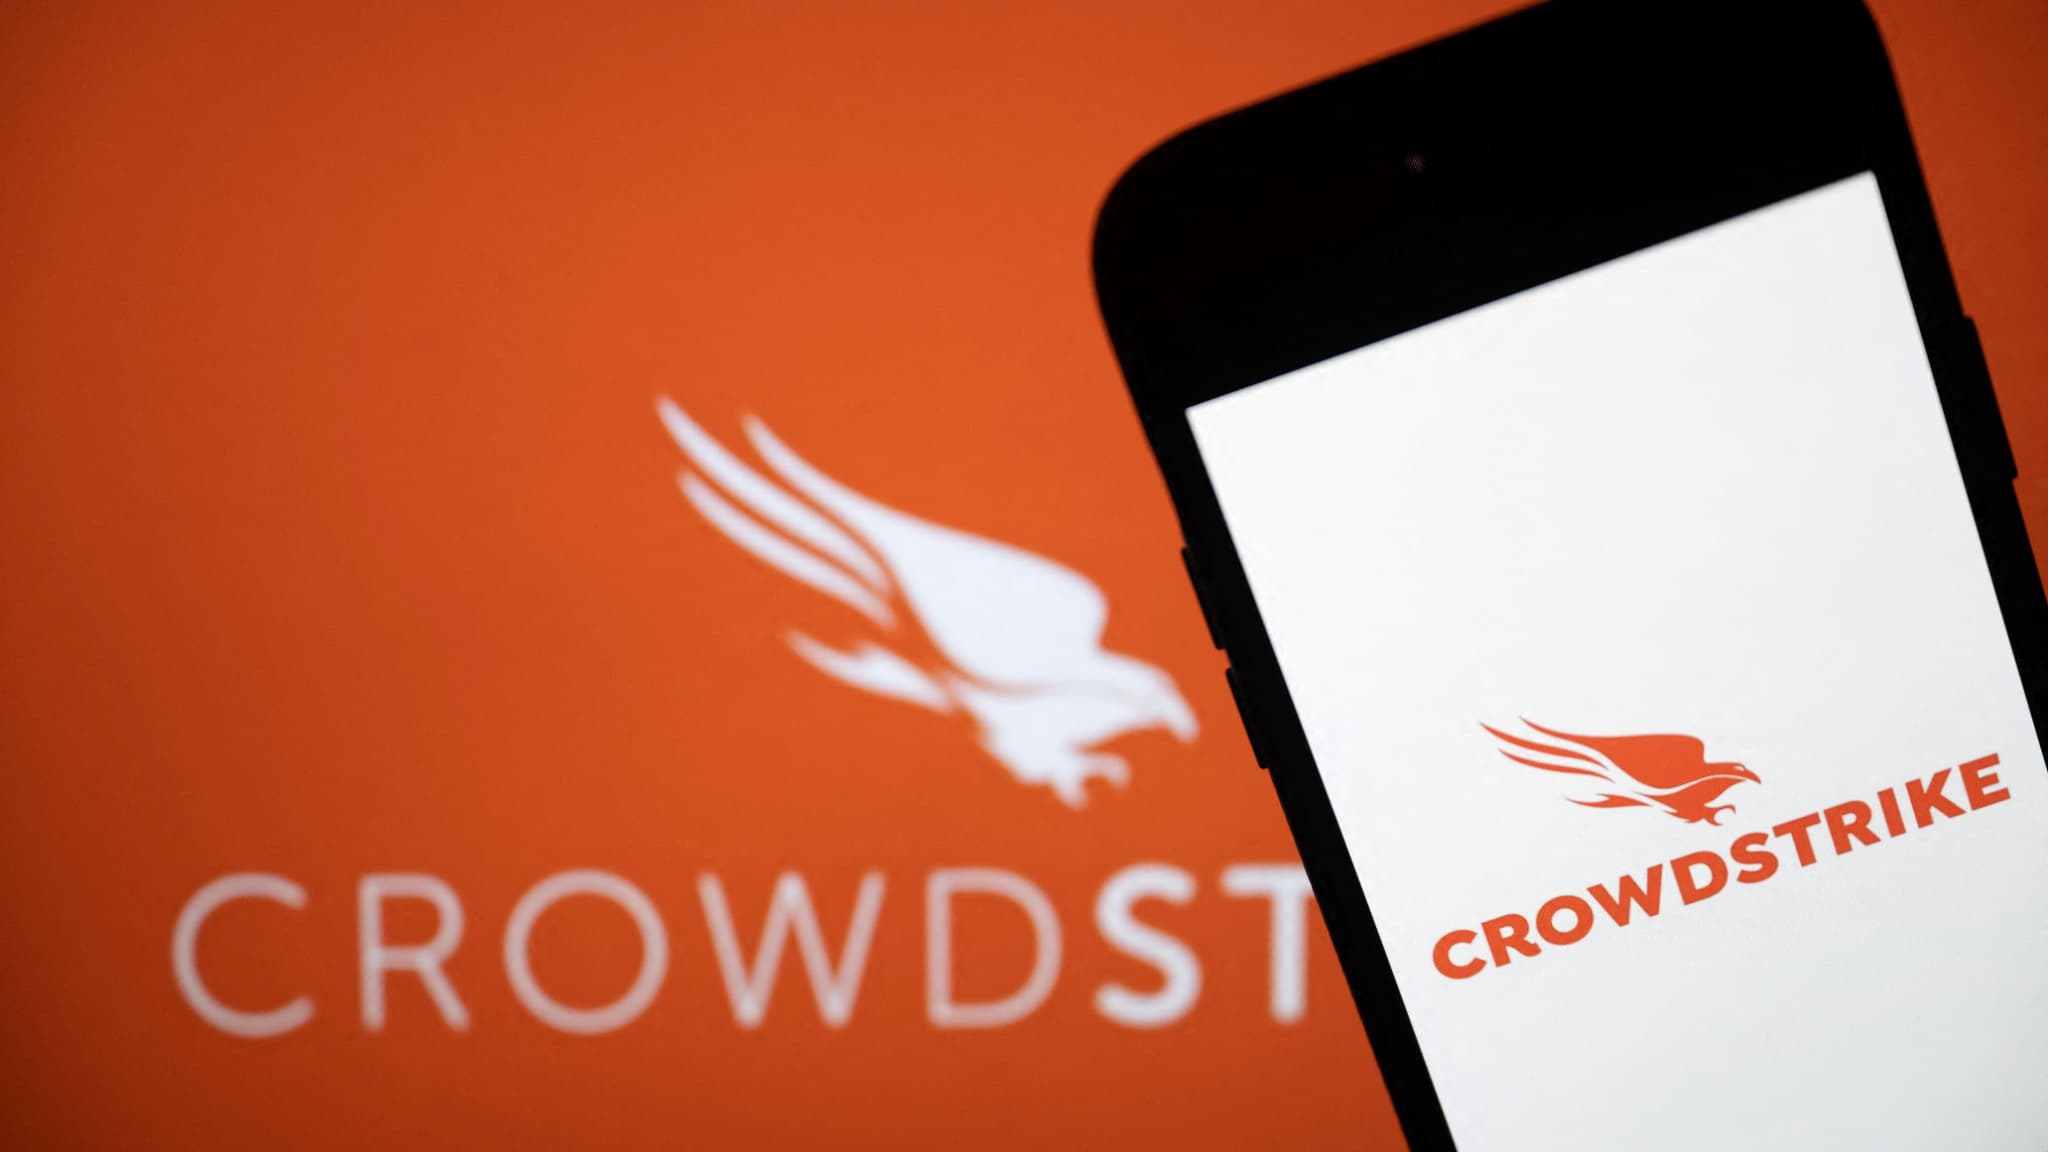 Crowdstrike confirms that 97% of affected computers are back up and running